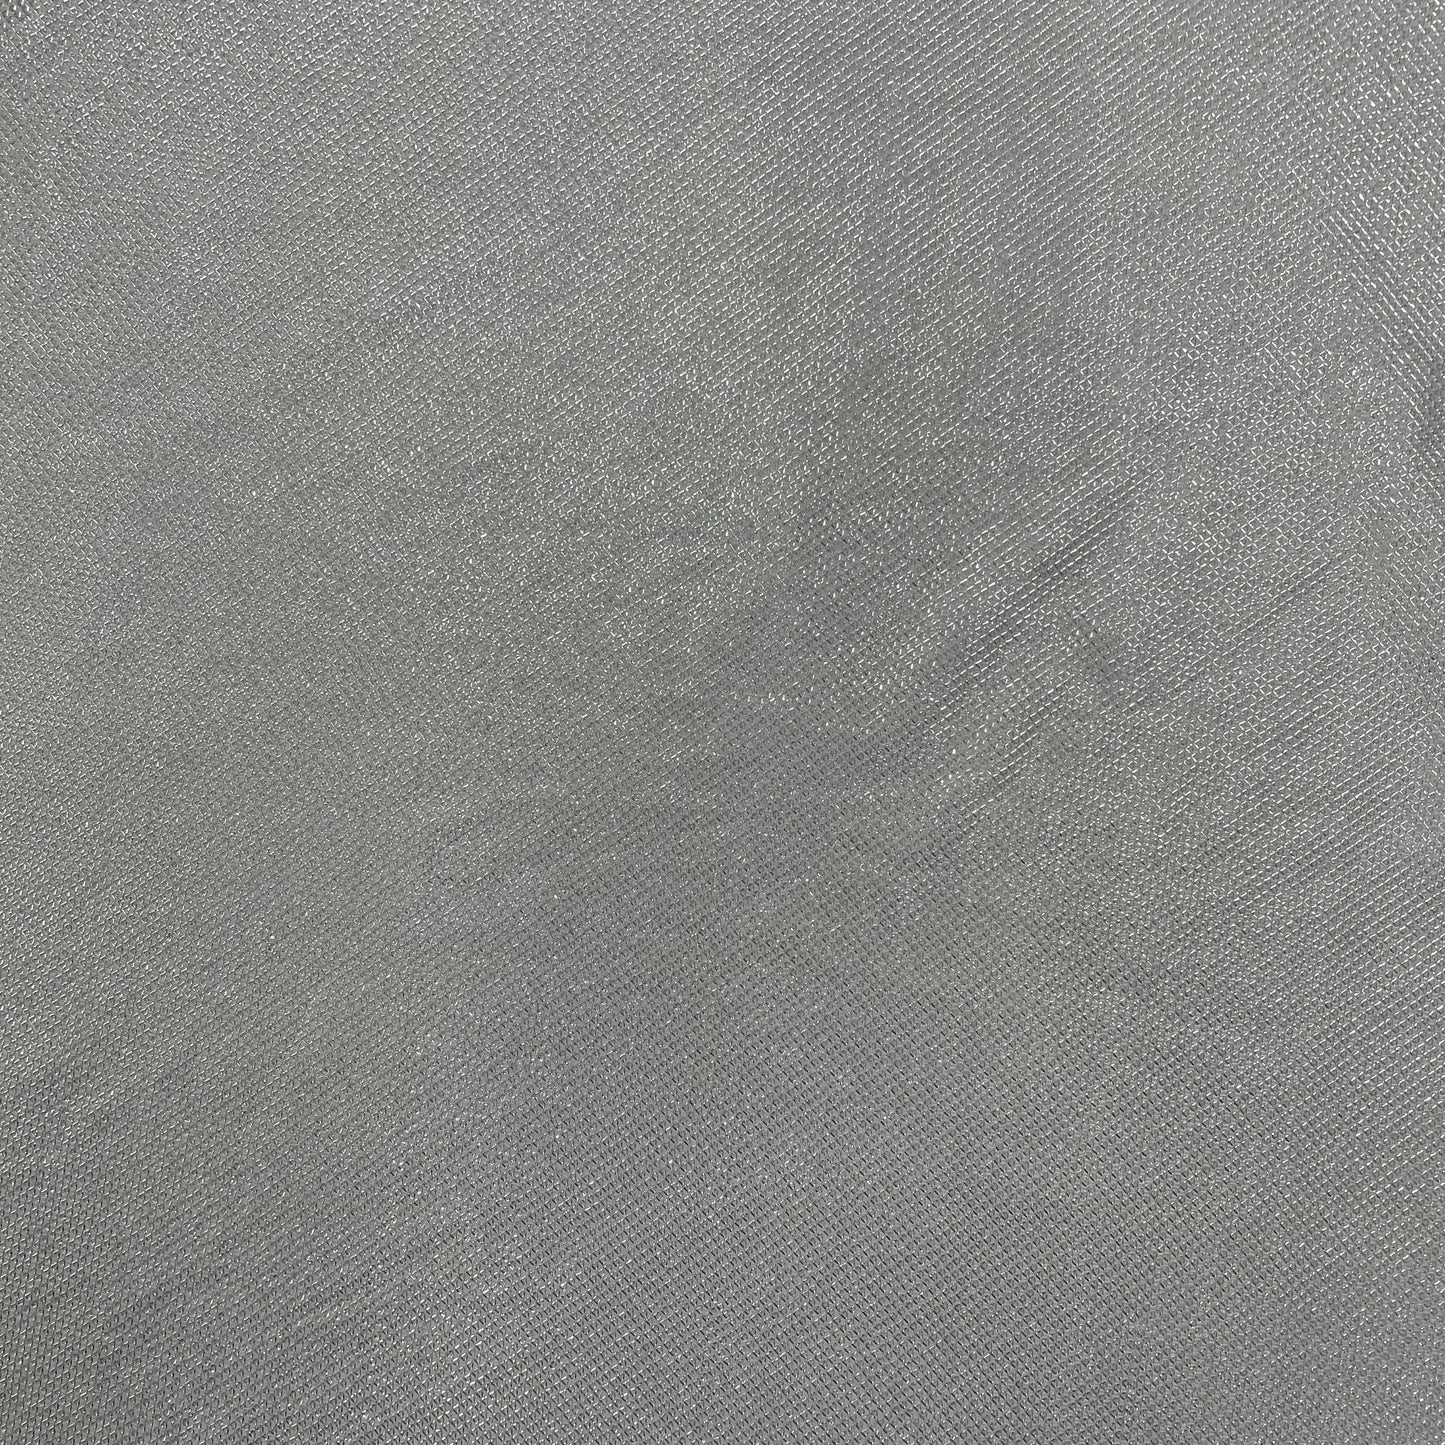 Silver Imorted Lurex Knitted Fabric - TradeUNO